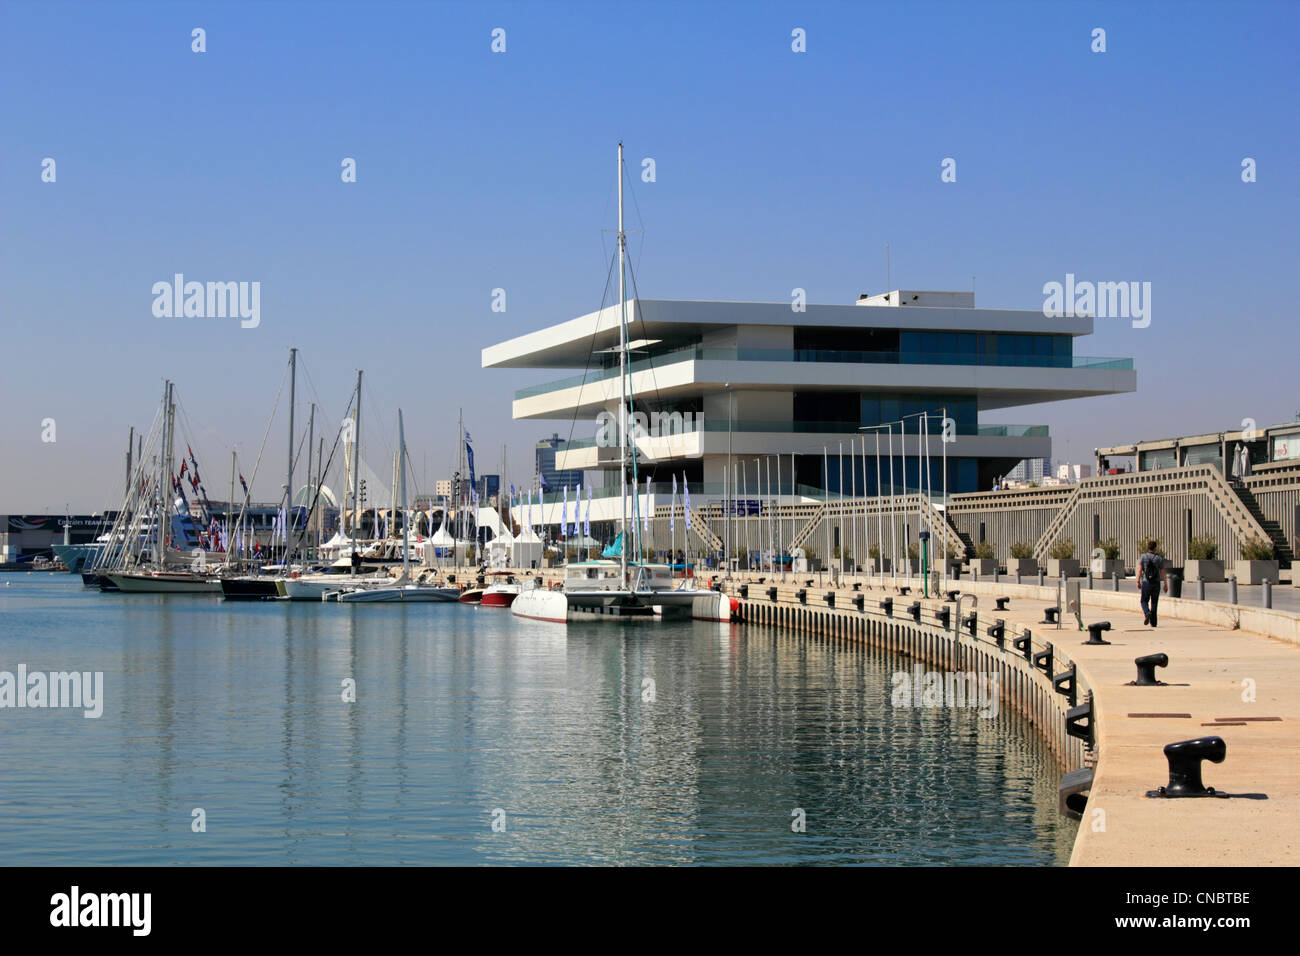 Veles e Vents (sails and winds) or America's Cup Building in The Port of Valencia Spain by David Chipperfield Architects Stock Photo